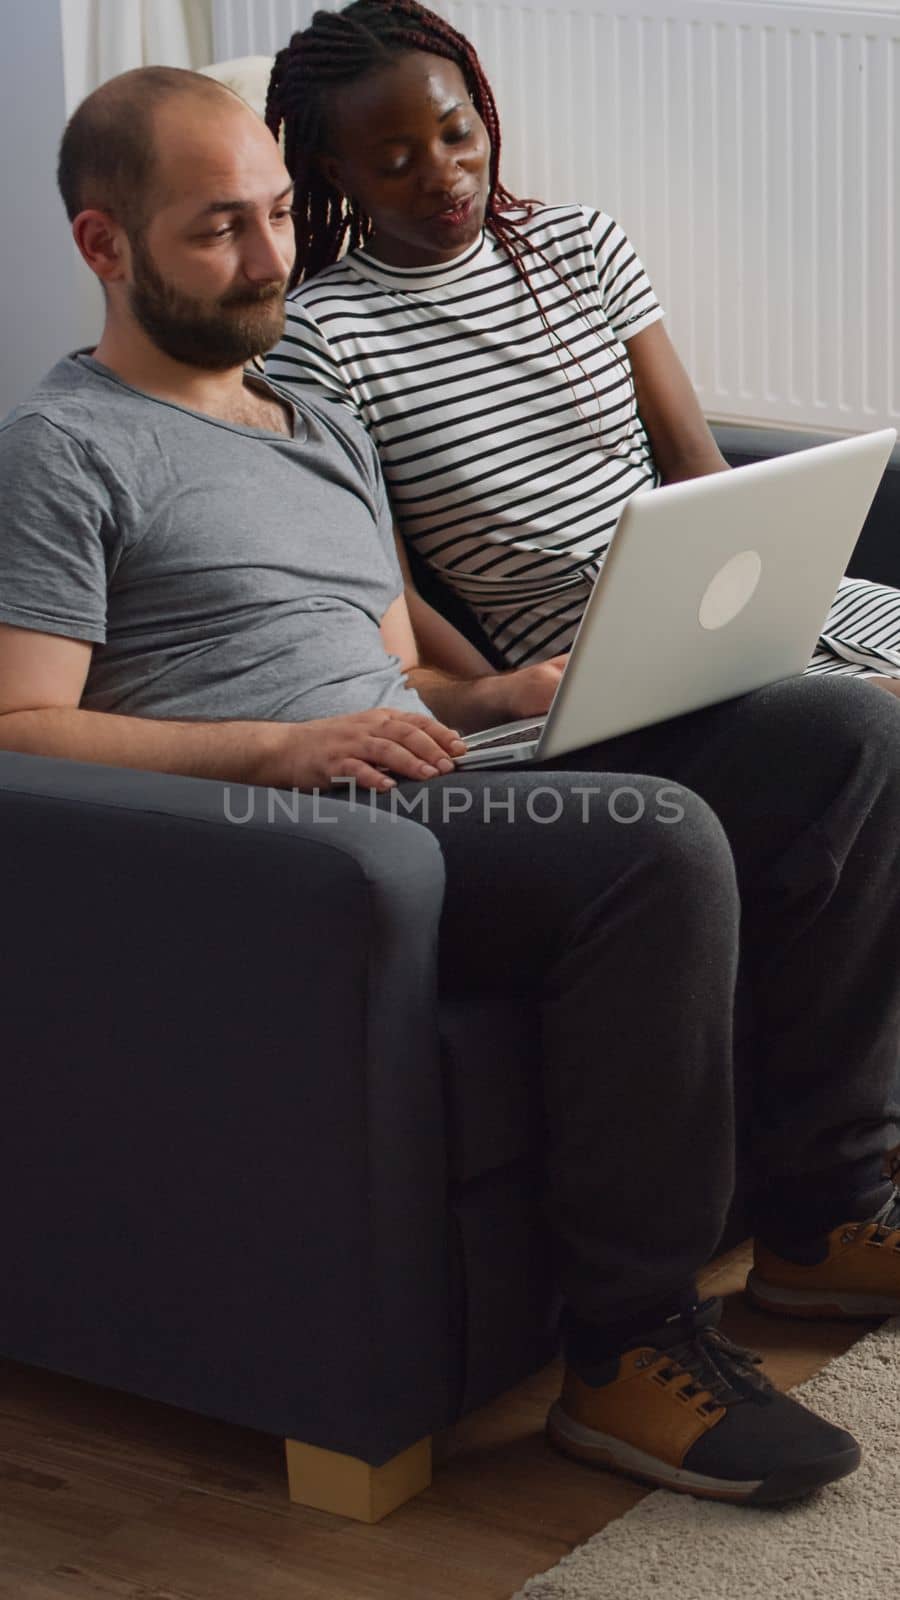 Modern interracial couple waving on video call conference sitting on sofa in living room. Young multi ethnic partners using online remote communication on laptop with internet connection